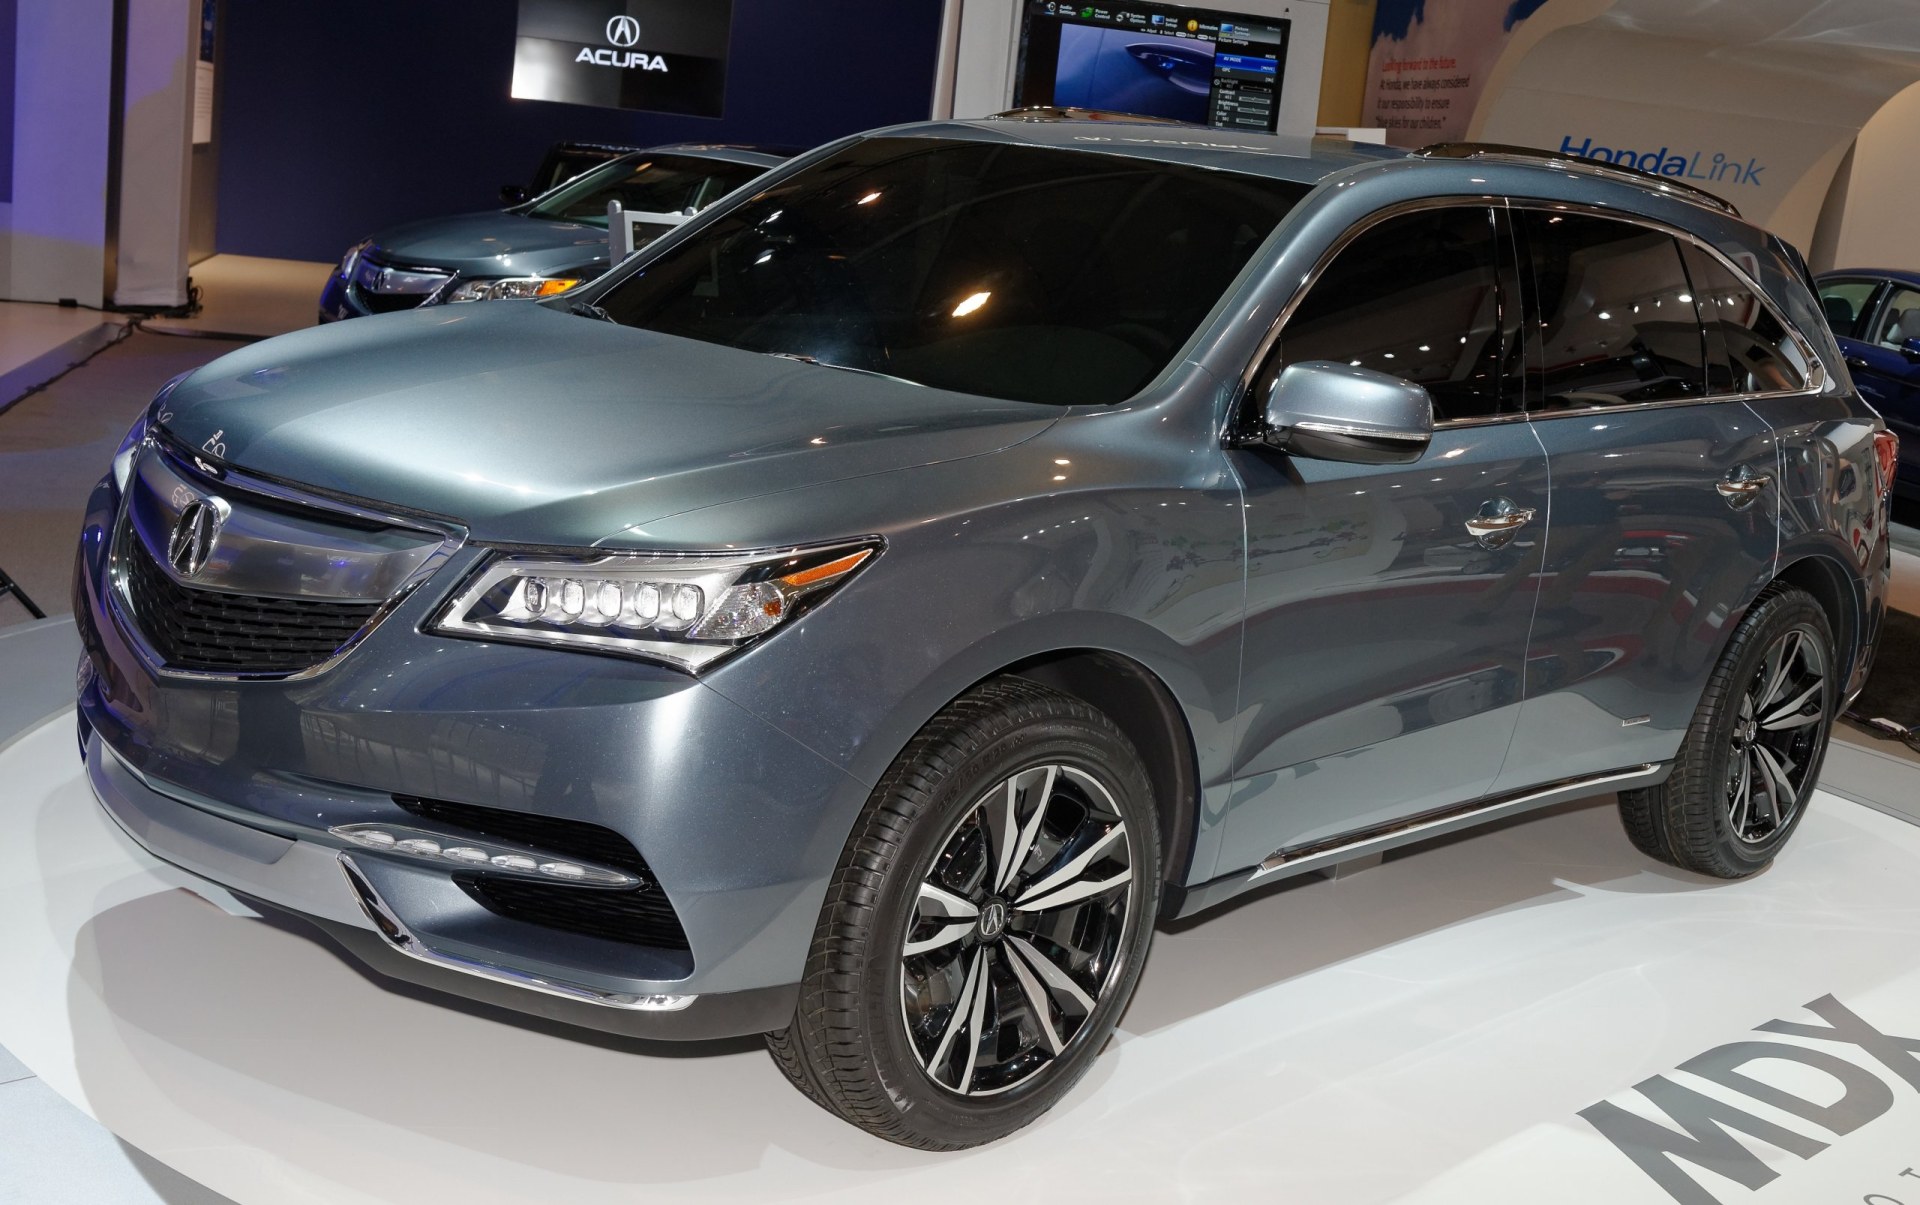 2015 Acura MDX on display at a car show